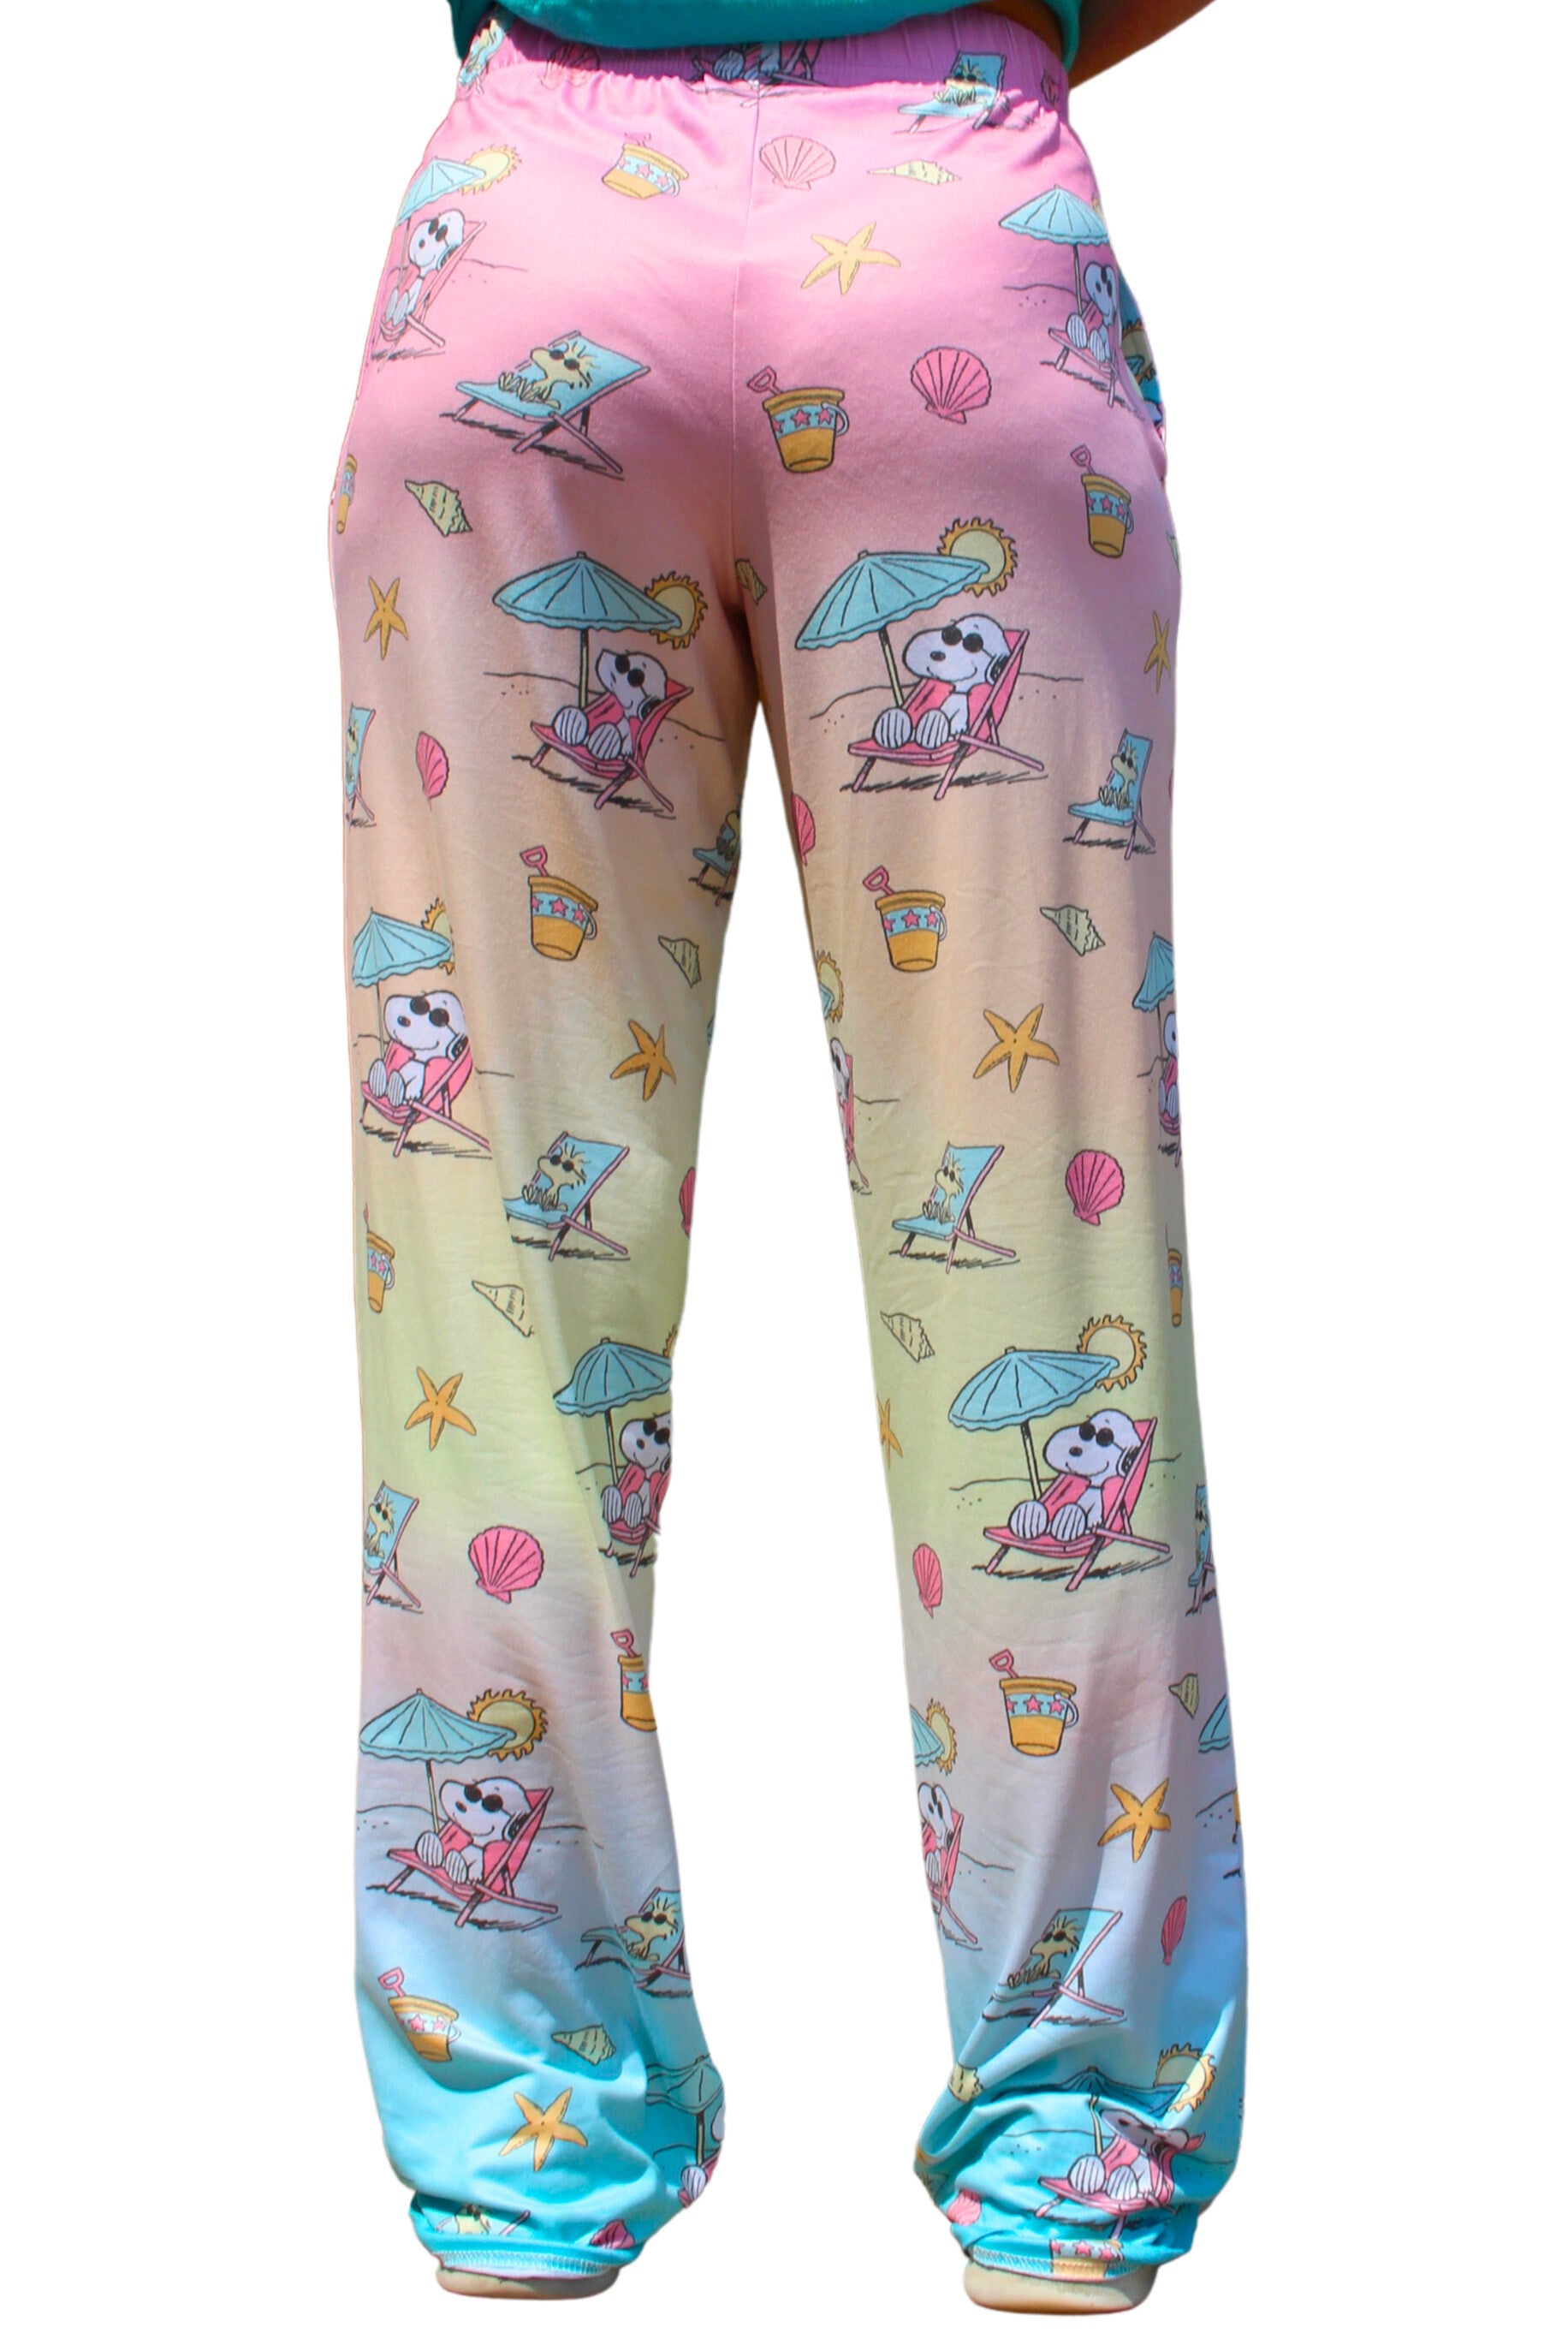 Person wearing BRIEF INSANITY Snoopy Beach Pajama Lounge Pants rear angle